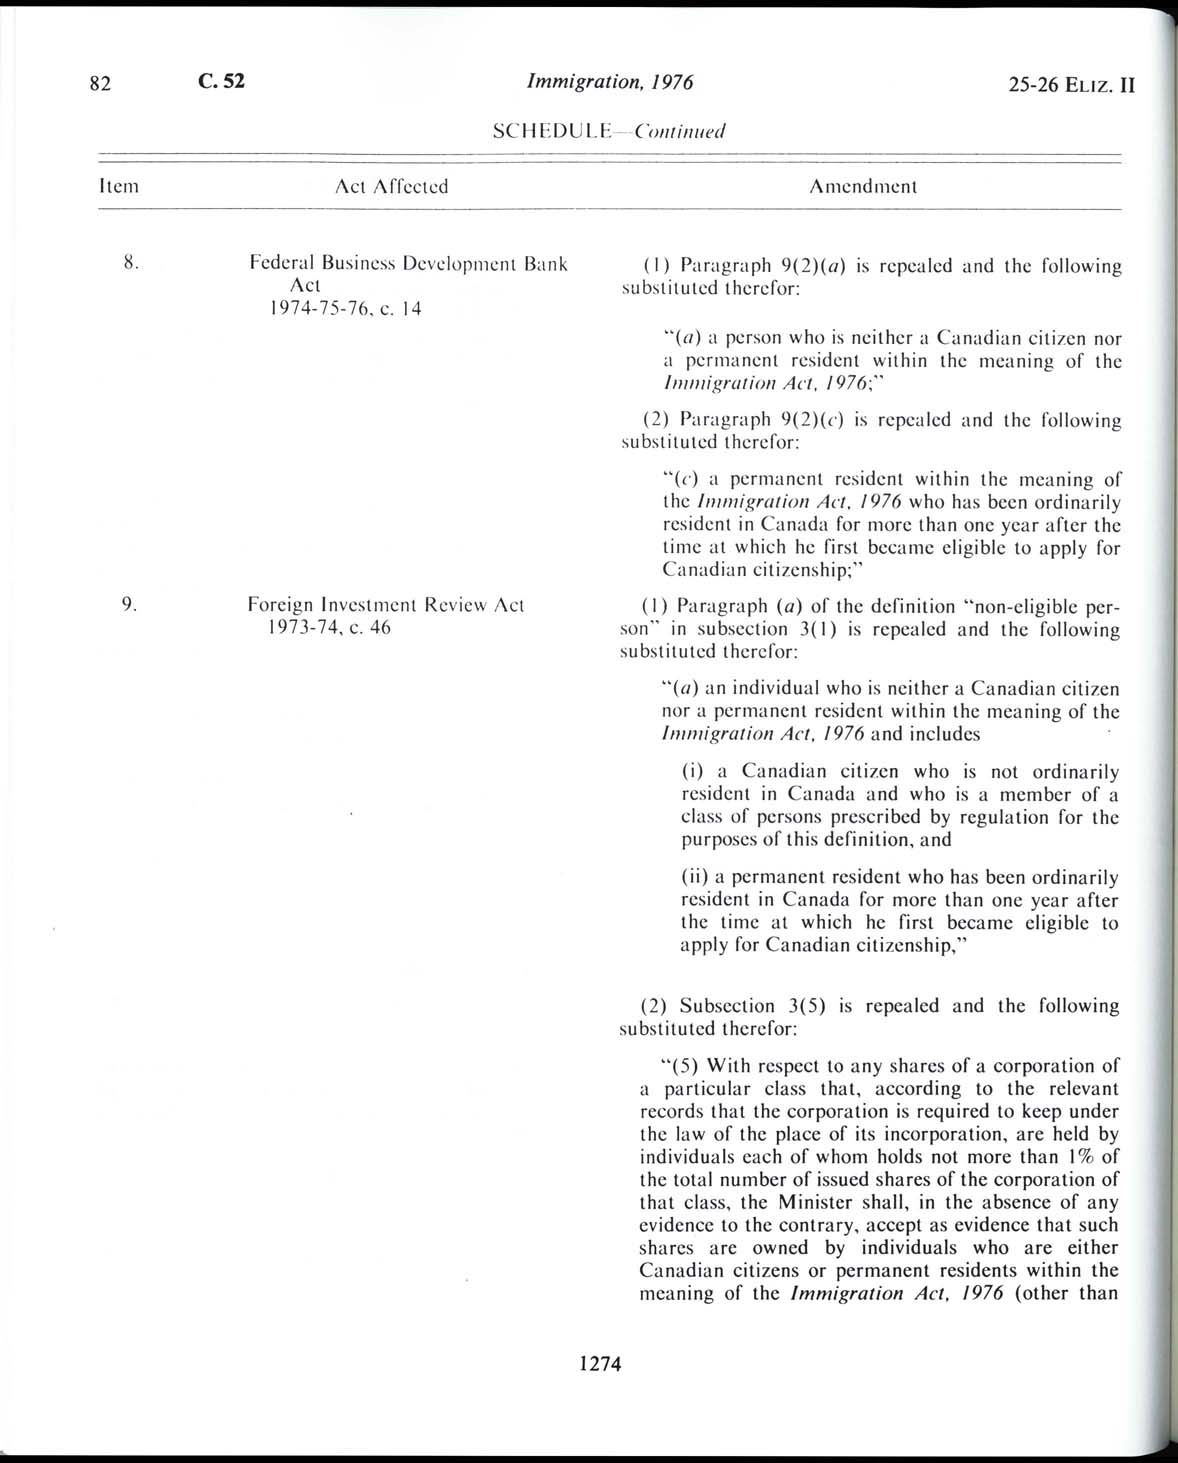 Page 1274 Immigration Act, 1976